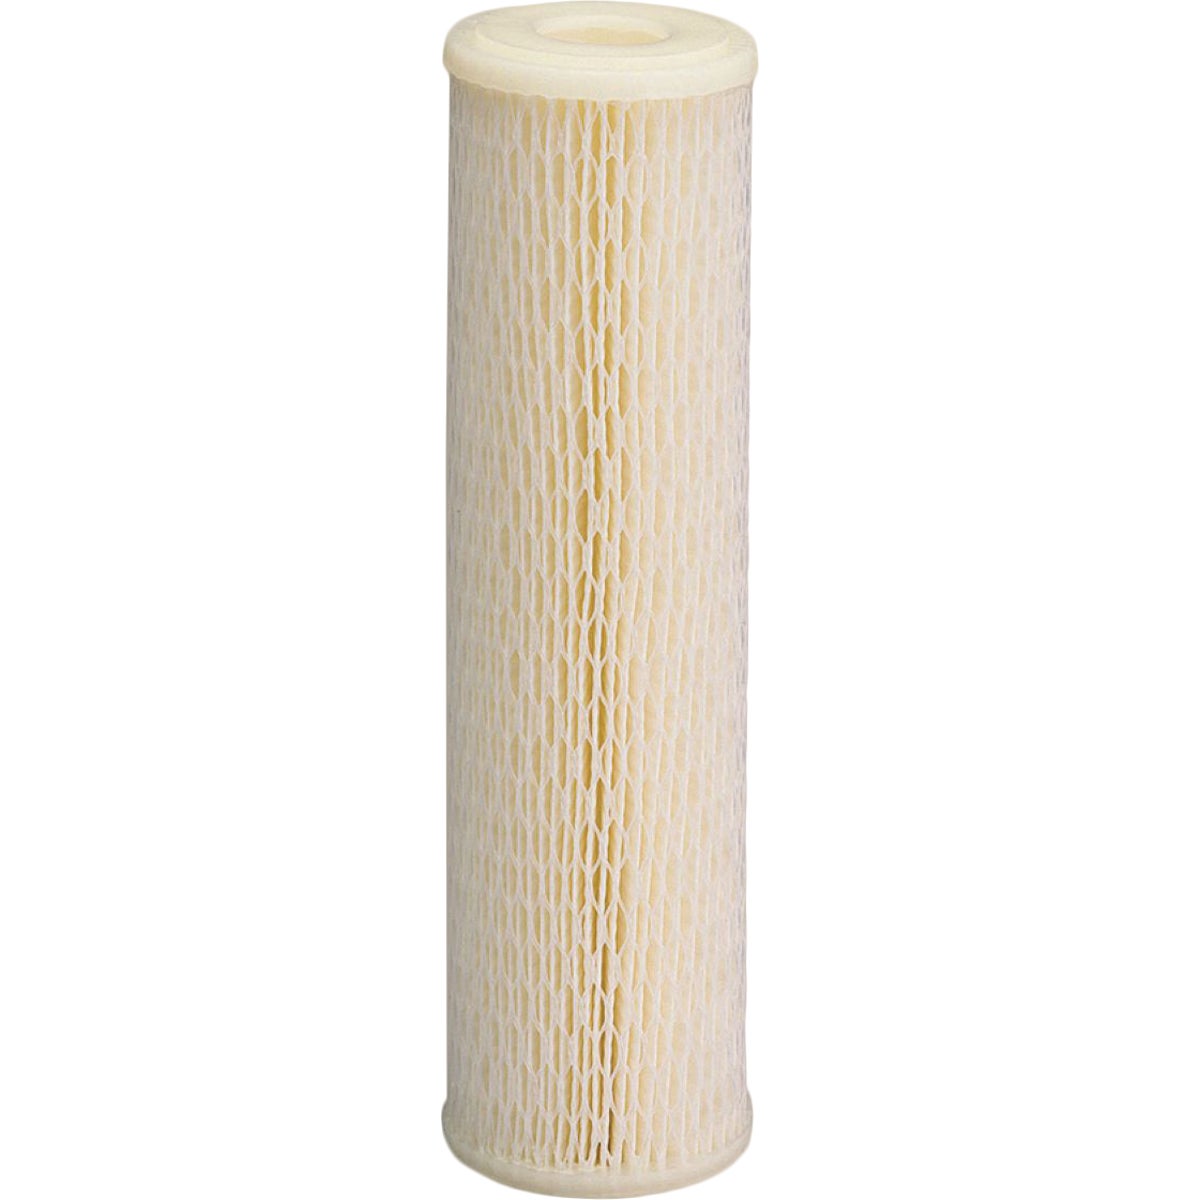 Item 432695, Replacement sediment filter cartridge removes dirt, sand, silt, rust, and 